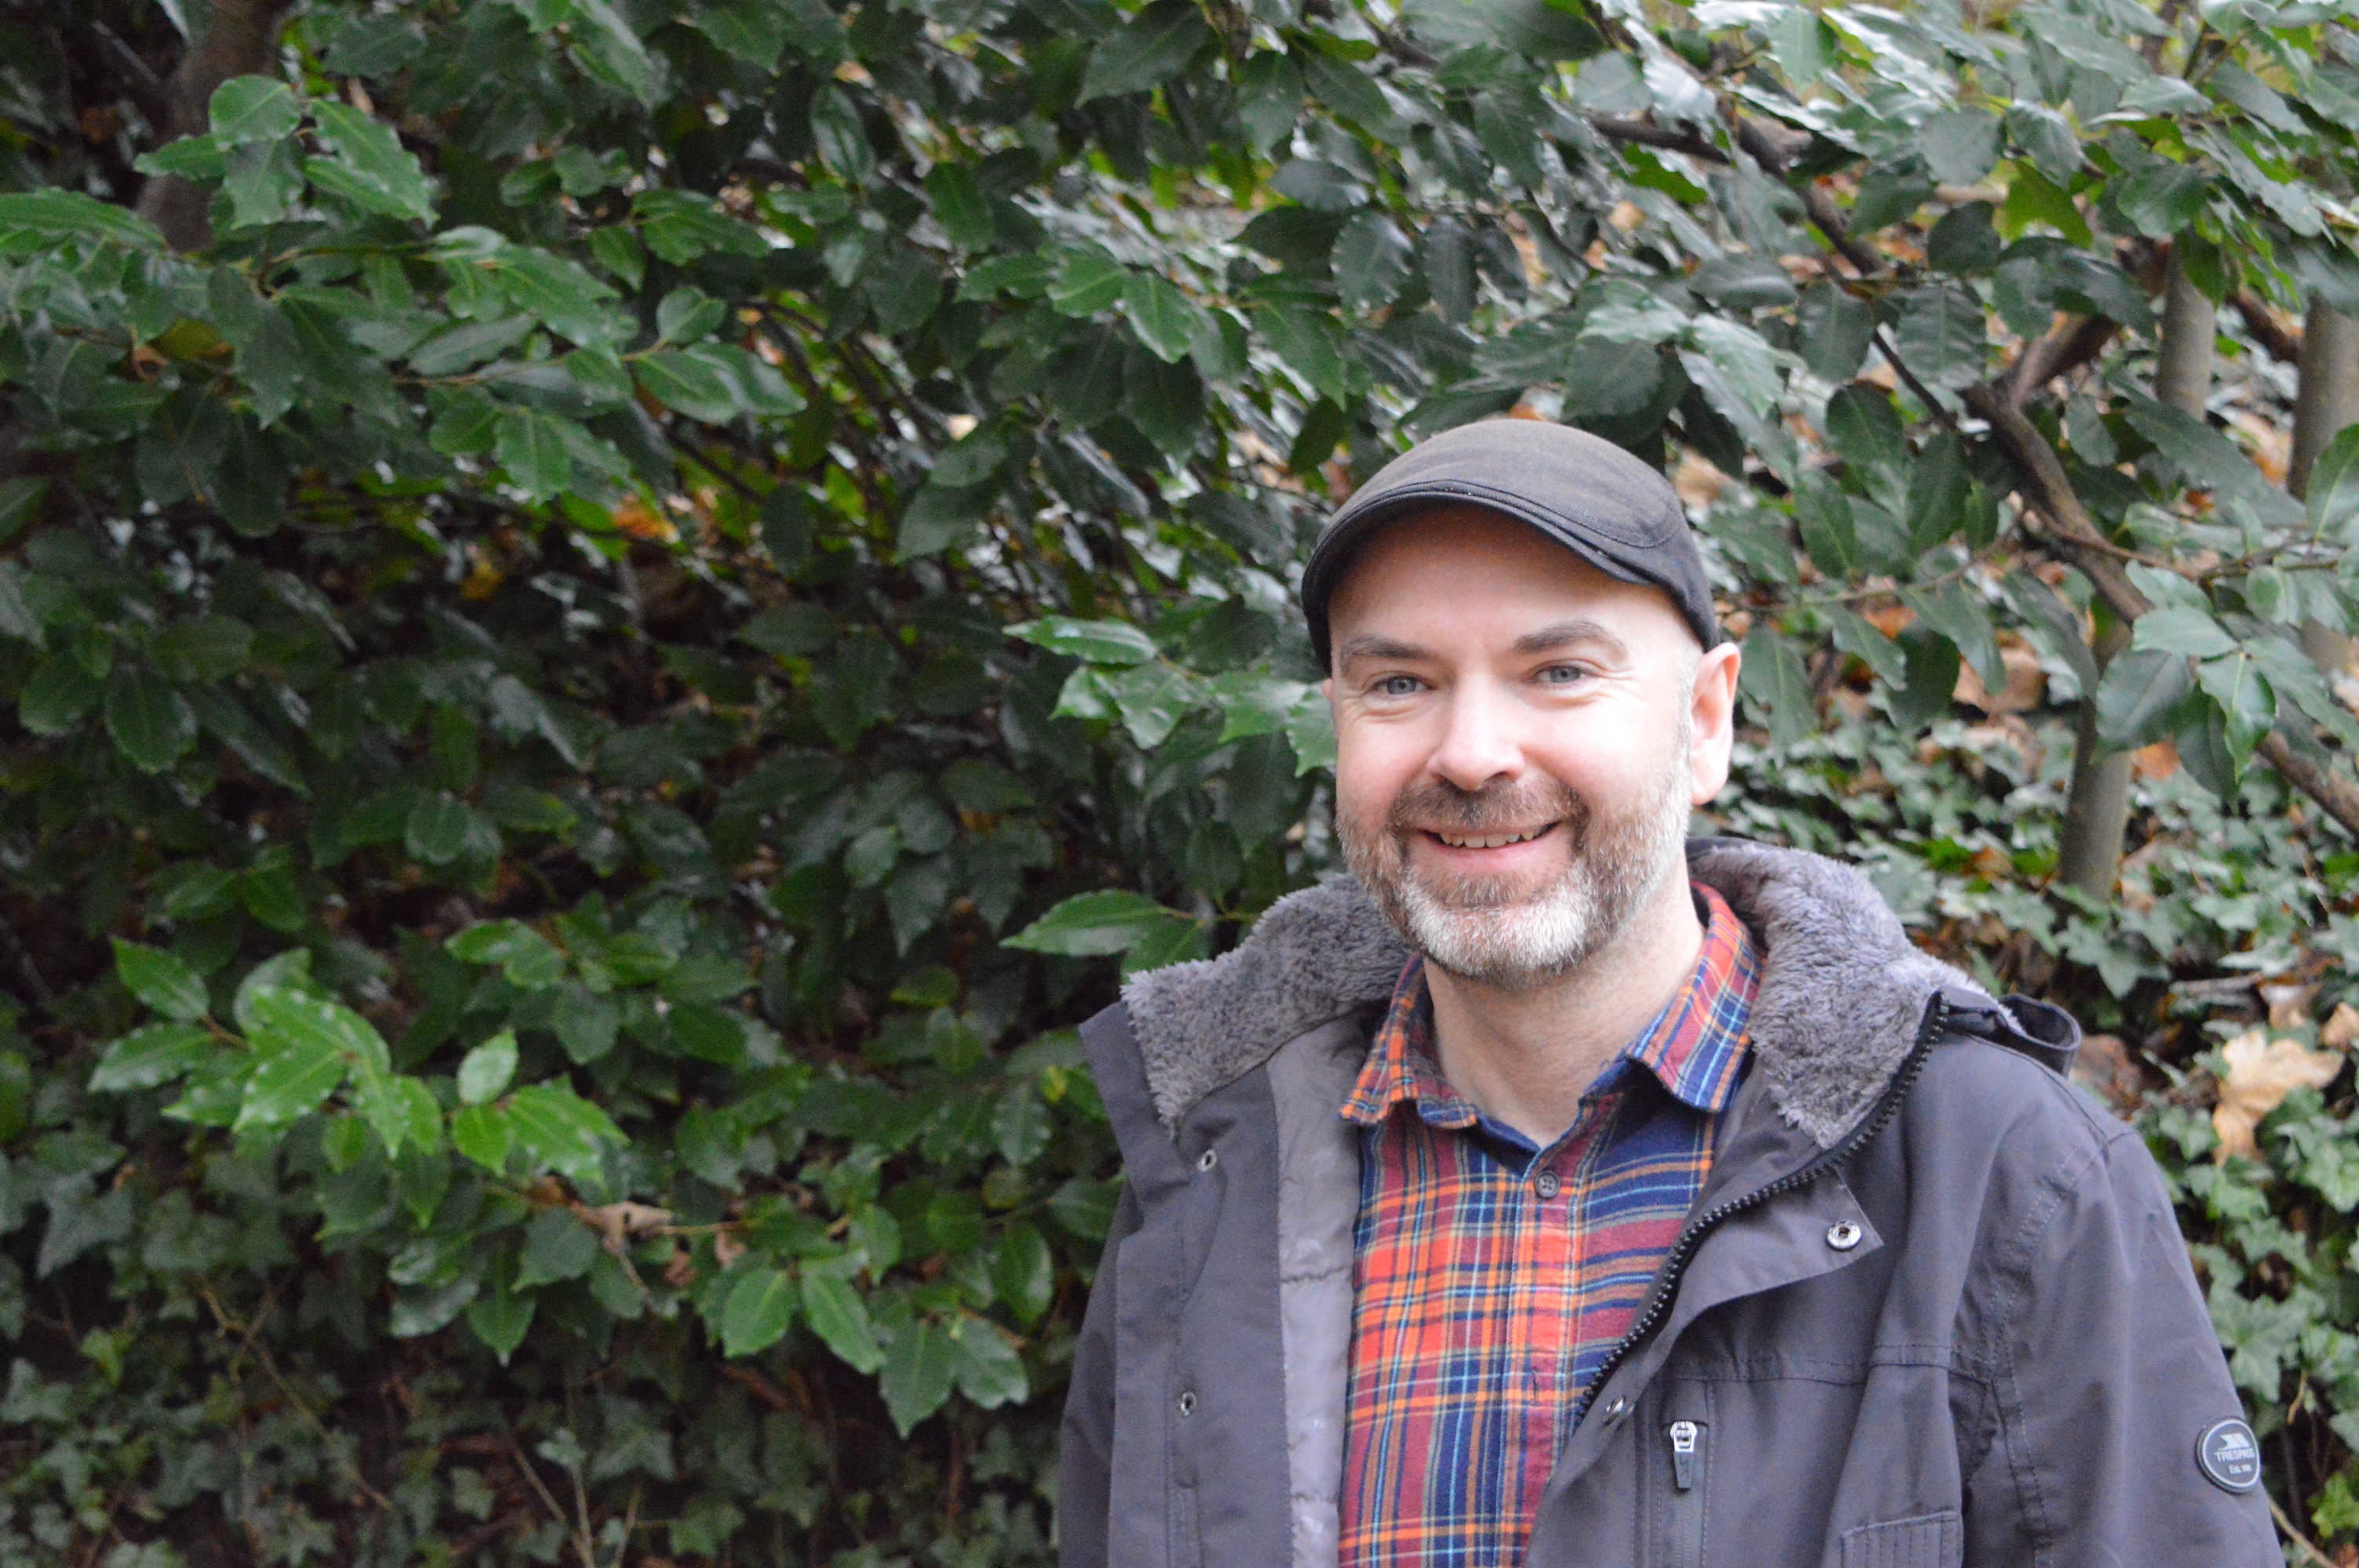 Pictured against a background of green foliage. Paul Steele standing to the right of the image, wearing a flat cap and winter coat.